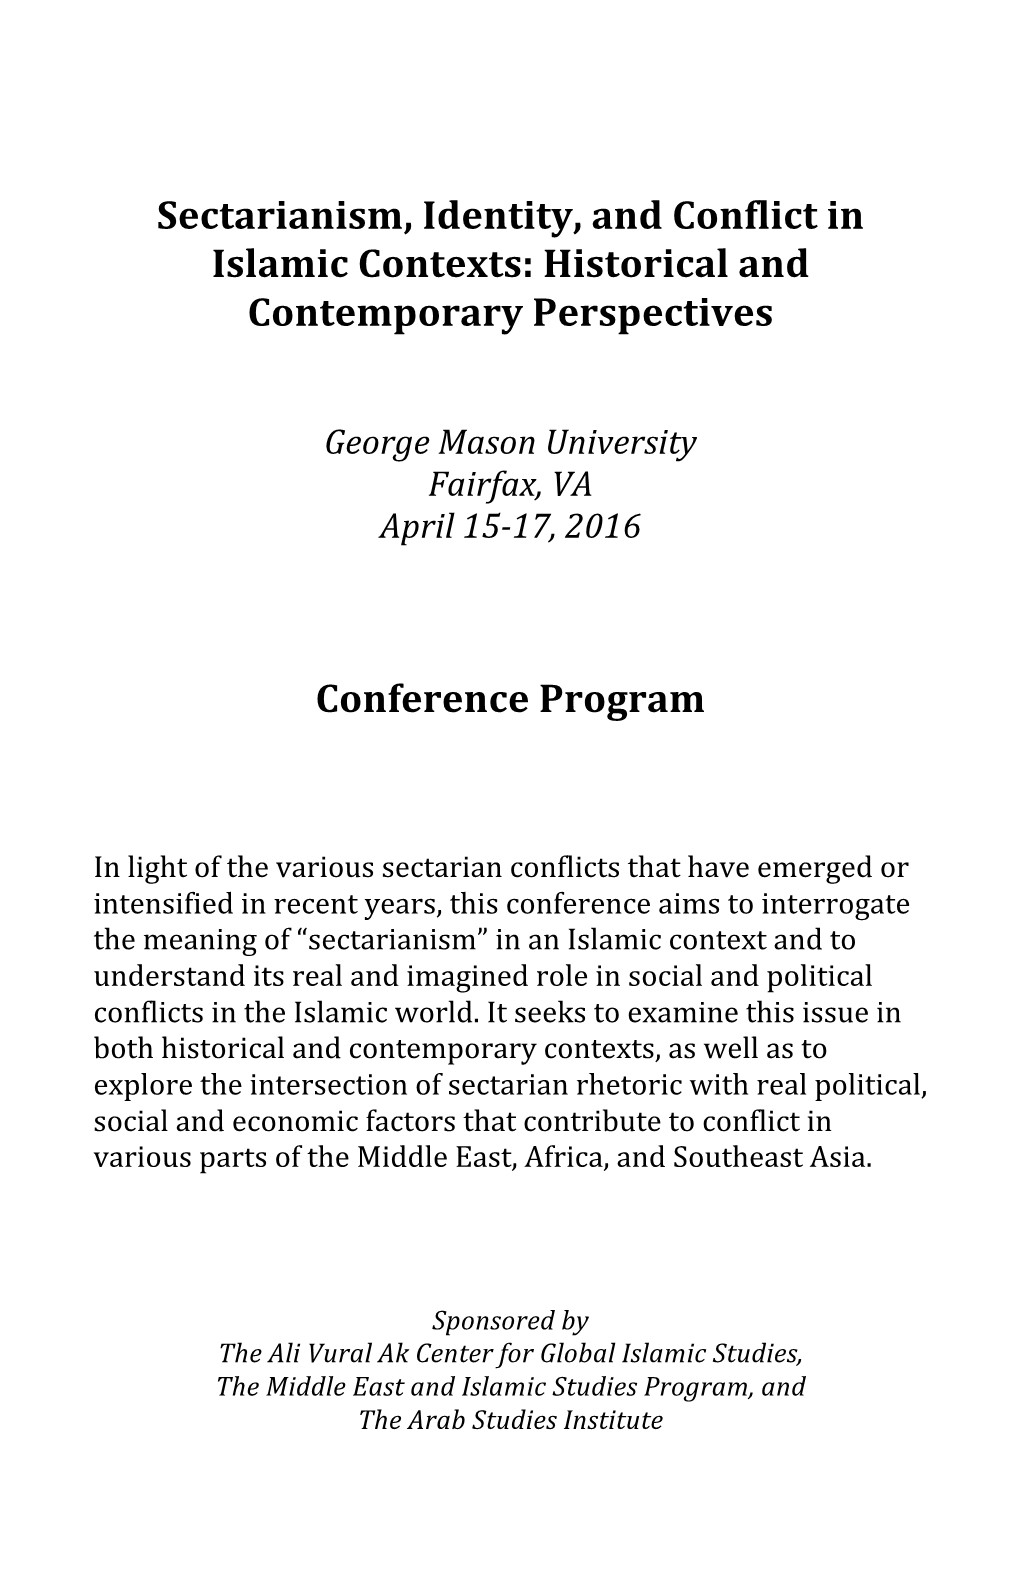 Sectarianism, Identity, and Conflict in Islamic Contexts: Historical and Contemporary Perspectives